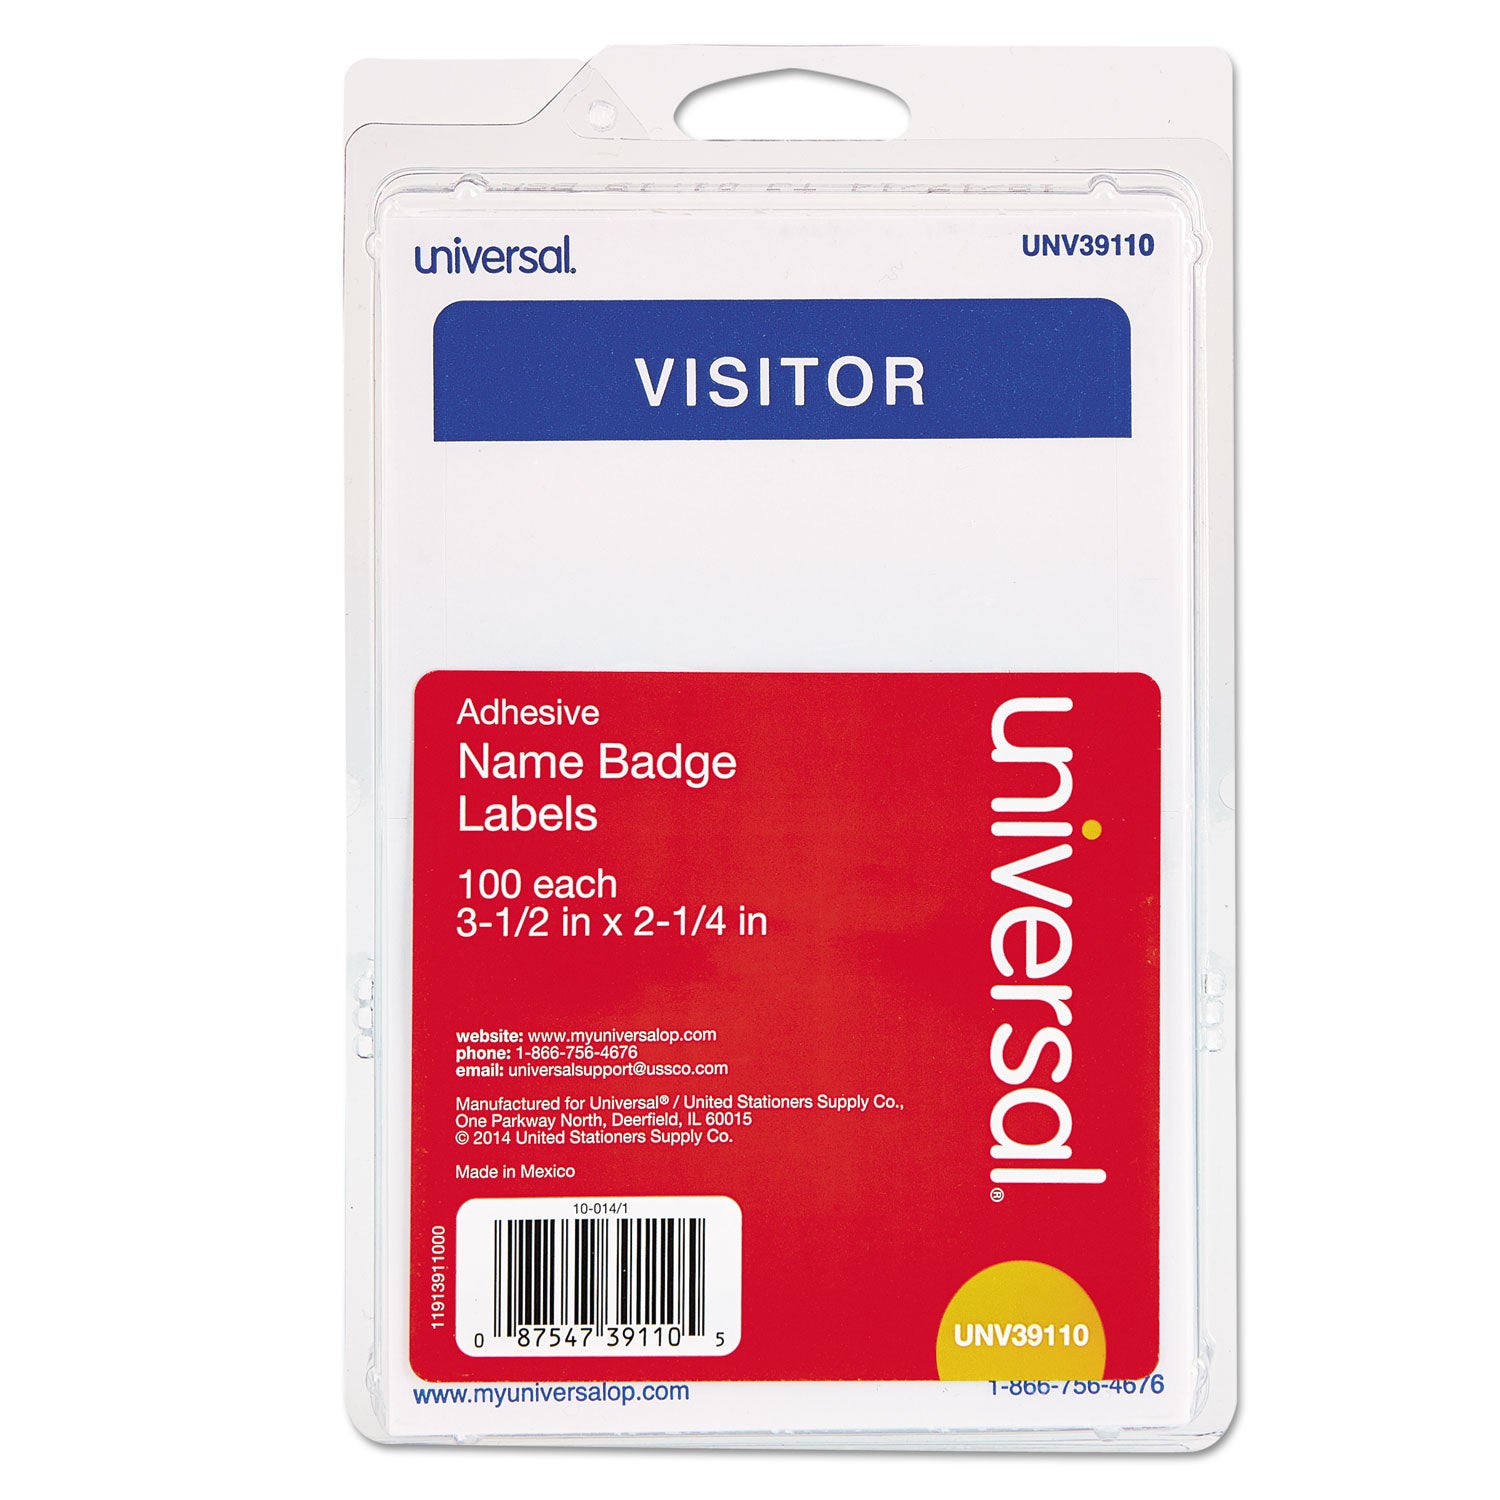 Visitor Self-Adhesive Name Badges, 3.5 x 2.25, White/Blue, 100/Pack - 